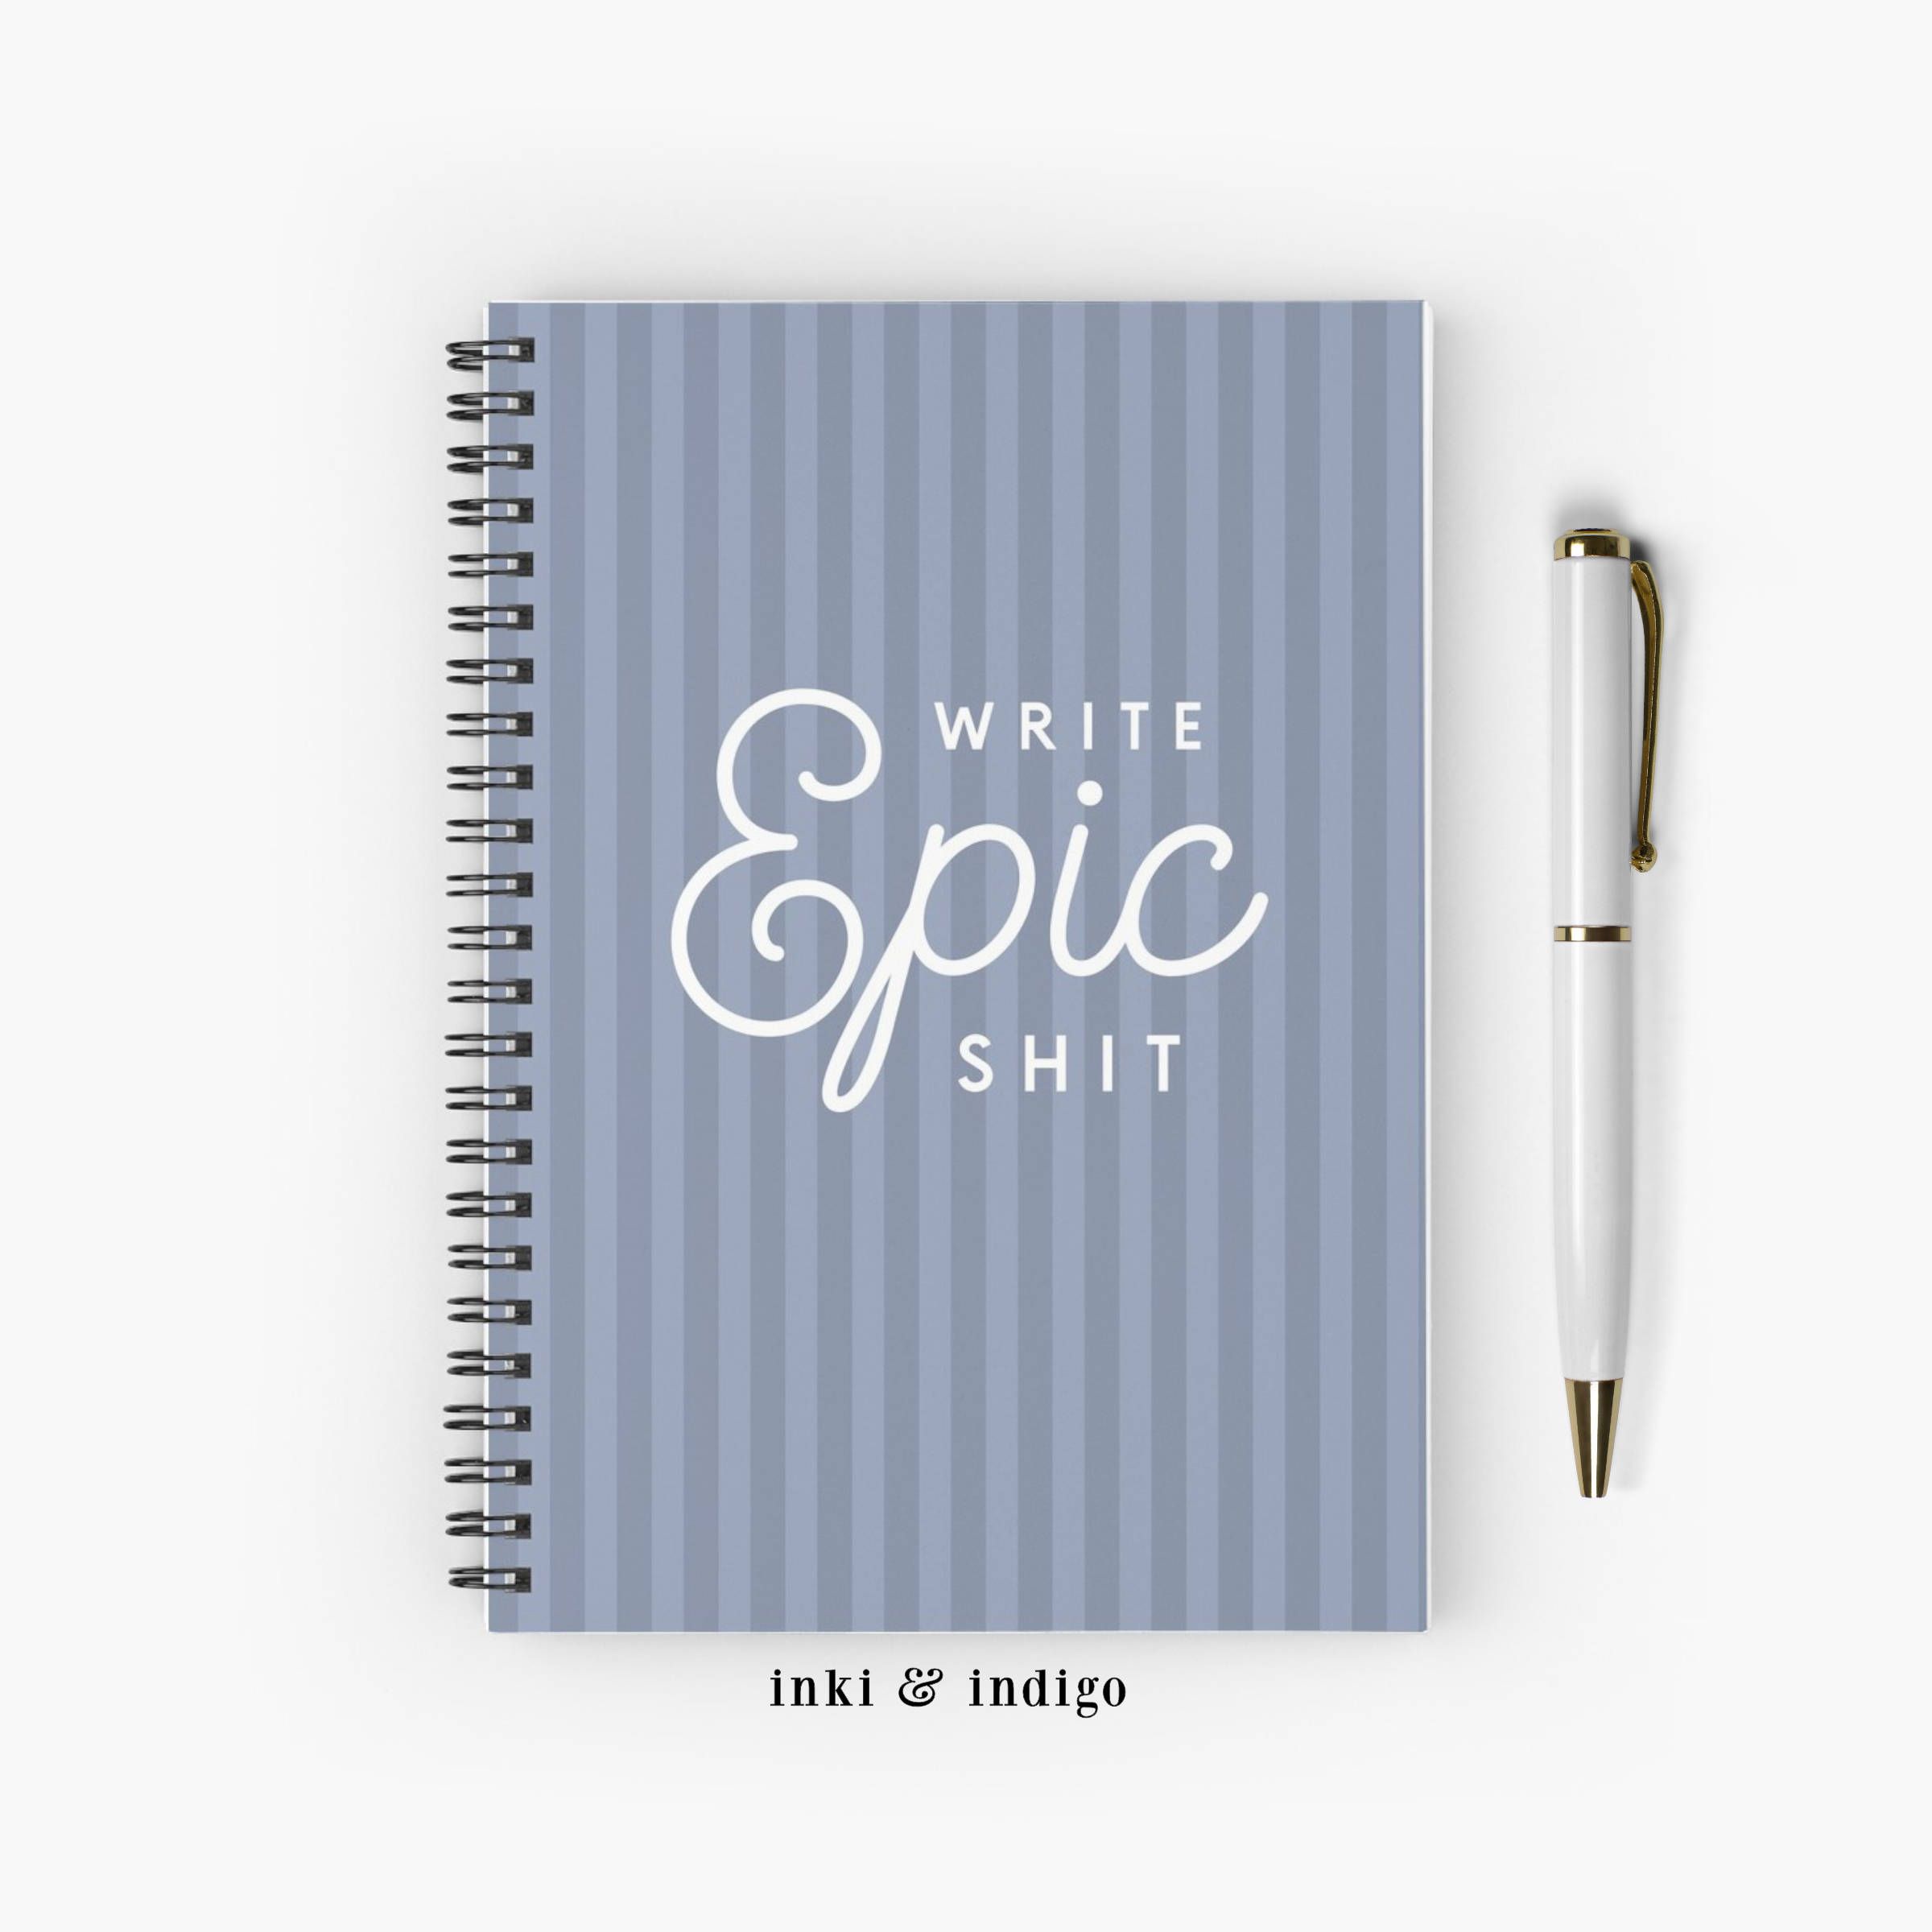 Write Epic Shit - Spiral Notebook With Lined Paper, A5 Writing ...